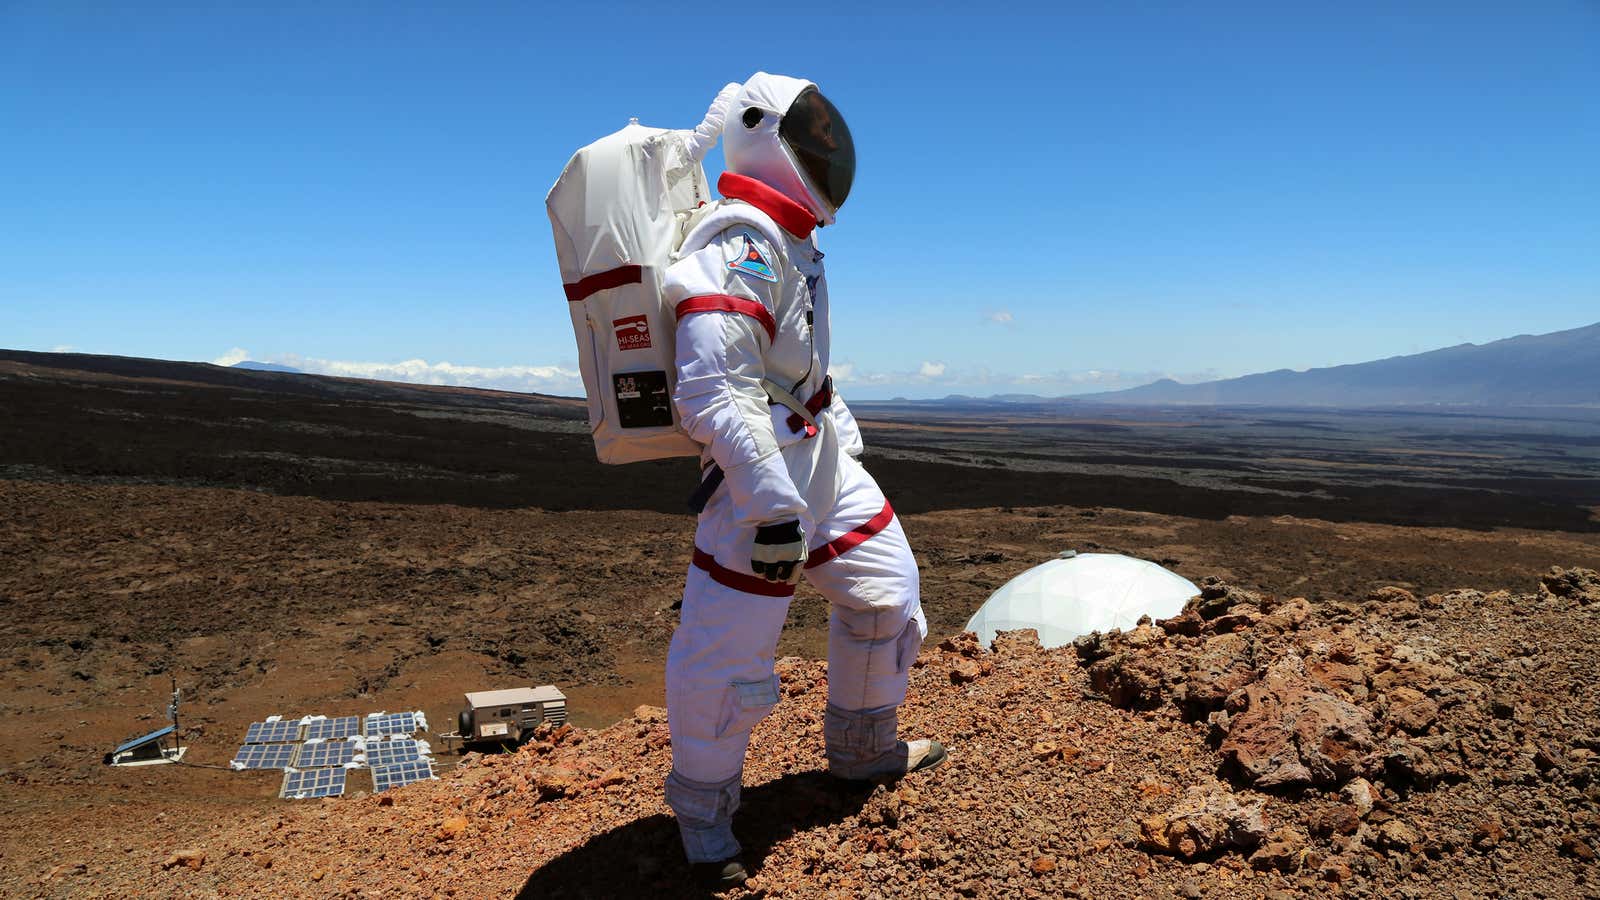 A HI-SEAS crew member from a previous mission explores ‘Mars’ in Hawaii.